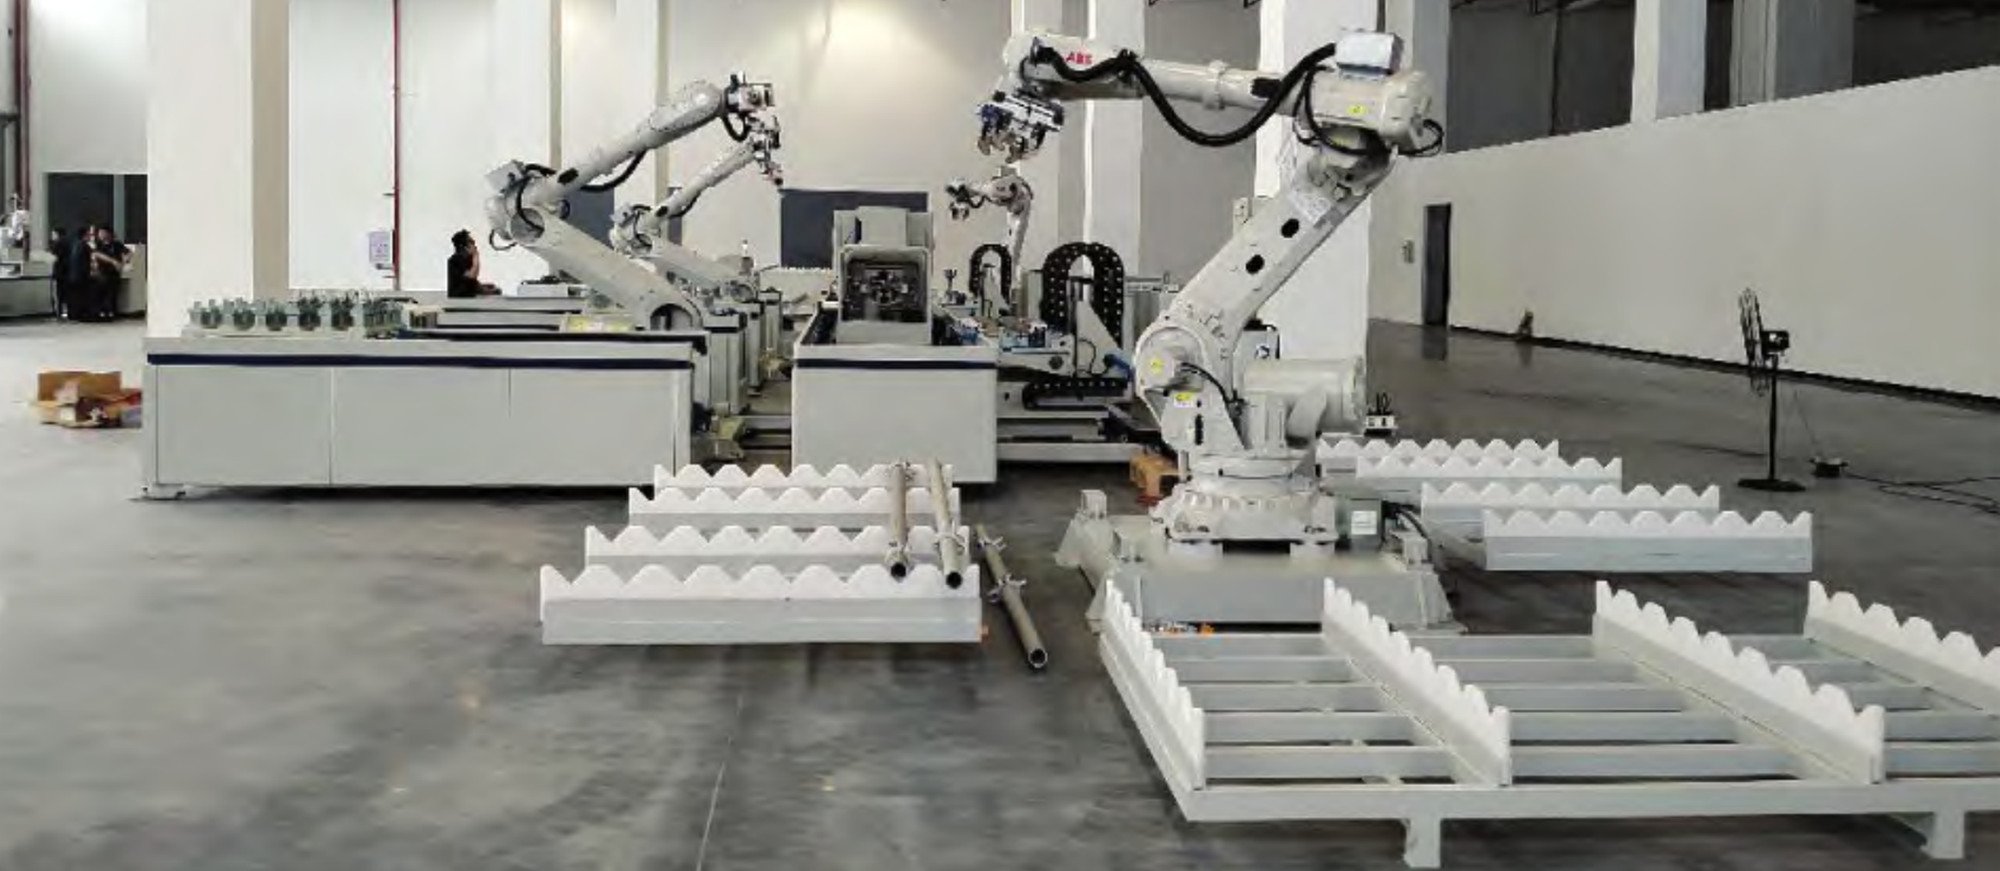 AI-enabled robots are being deployed in warehouses to boost efficiency in the handling, sorting and inspecting of OCS materials. Photo: China Railway Construction Electrification Bureau Group